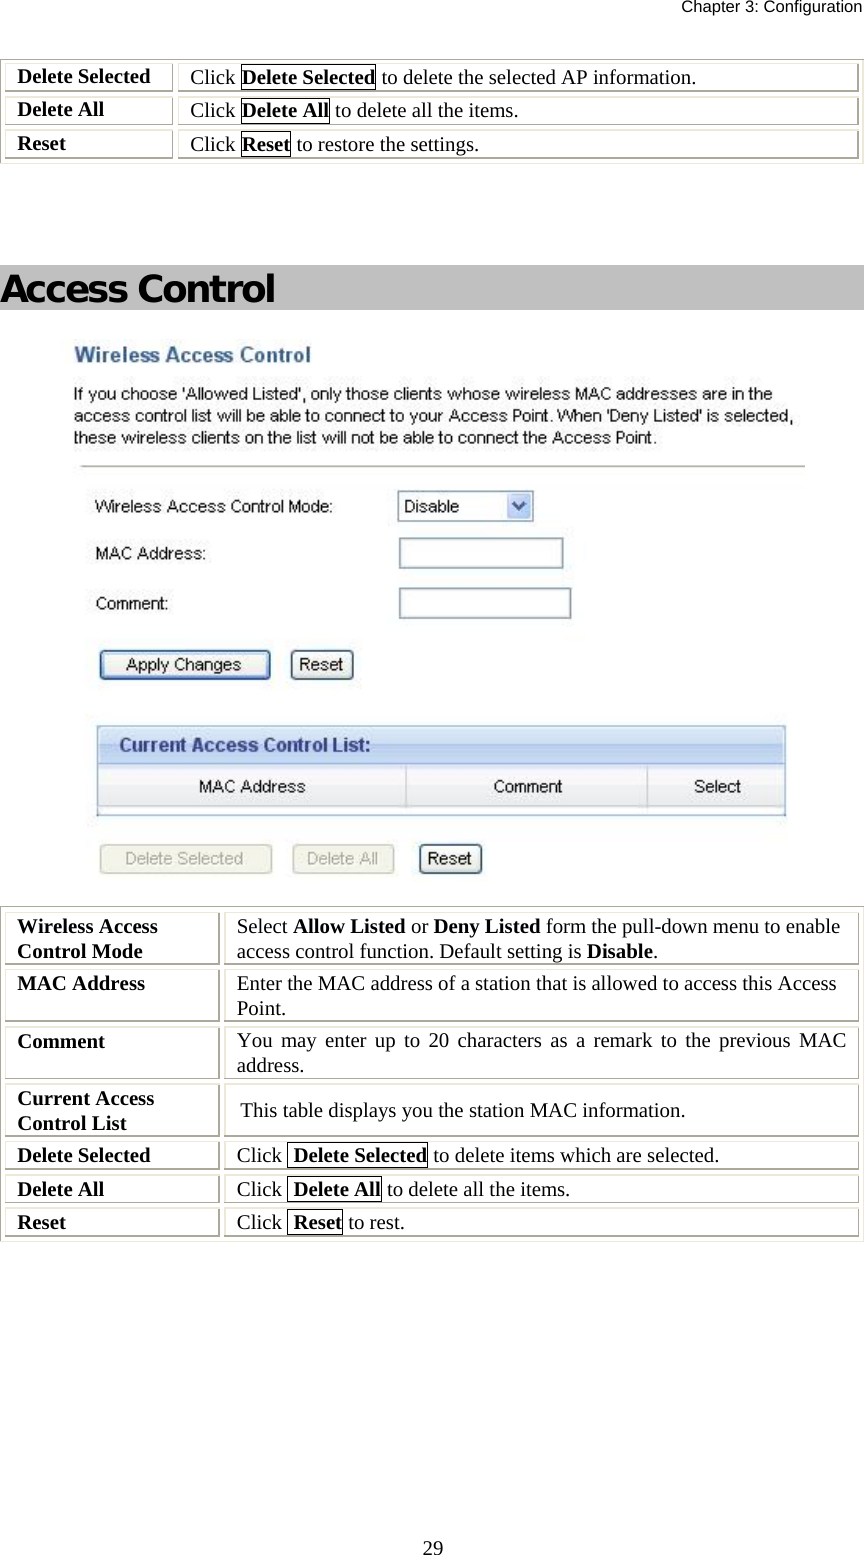   Chapter 3: Configuration  29Delete Selected  Click Delete Selected to delete the selected AP information. Delete All  Click Delete All to delete all the items. Reset   Click Reset to restore the settings.    Access Control   Wireless Access Control Mode  Select Allow Listed or Deny Listed form the pull-down menu to enable access control function. Default setting is Disable. MAC Address  Enter the MAC address of a station that is allowed to access this Access Point. Comment   You may enter up to 20 characters as a remark to the previous MAC address. Current Access Control List  This table displays you the station MAC information. Delete Selected  Click  Delete Selected to delete items which are selected. Delete All  Click  Delete All to delete all the items. Reset  Click  Reset to rest.  